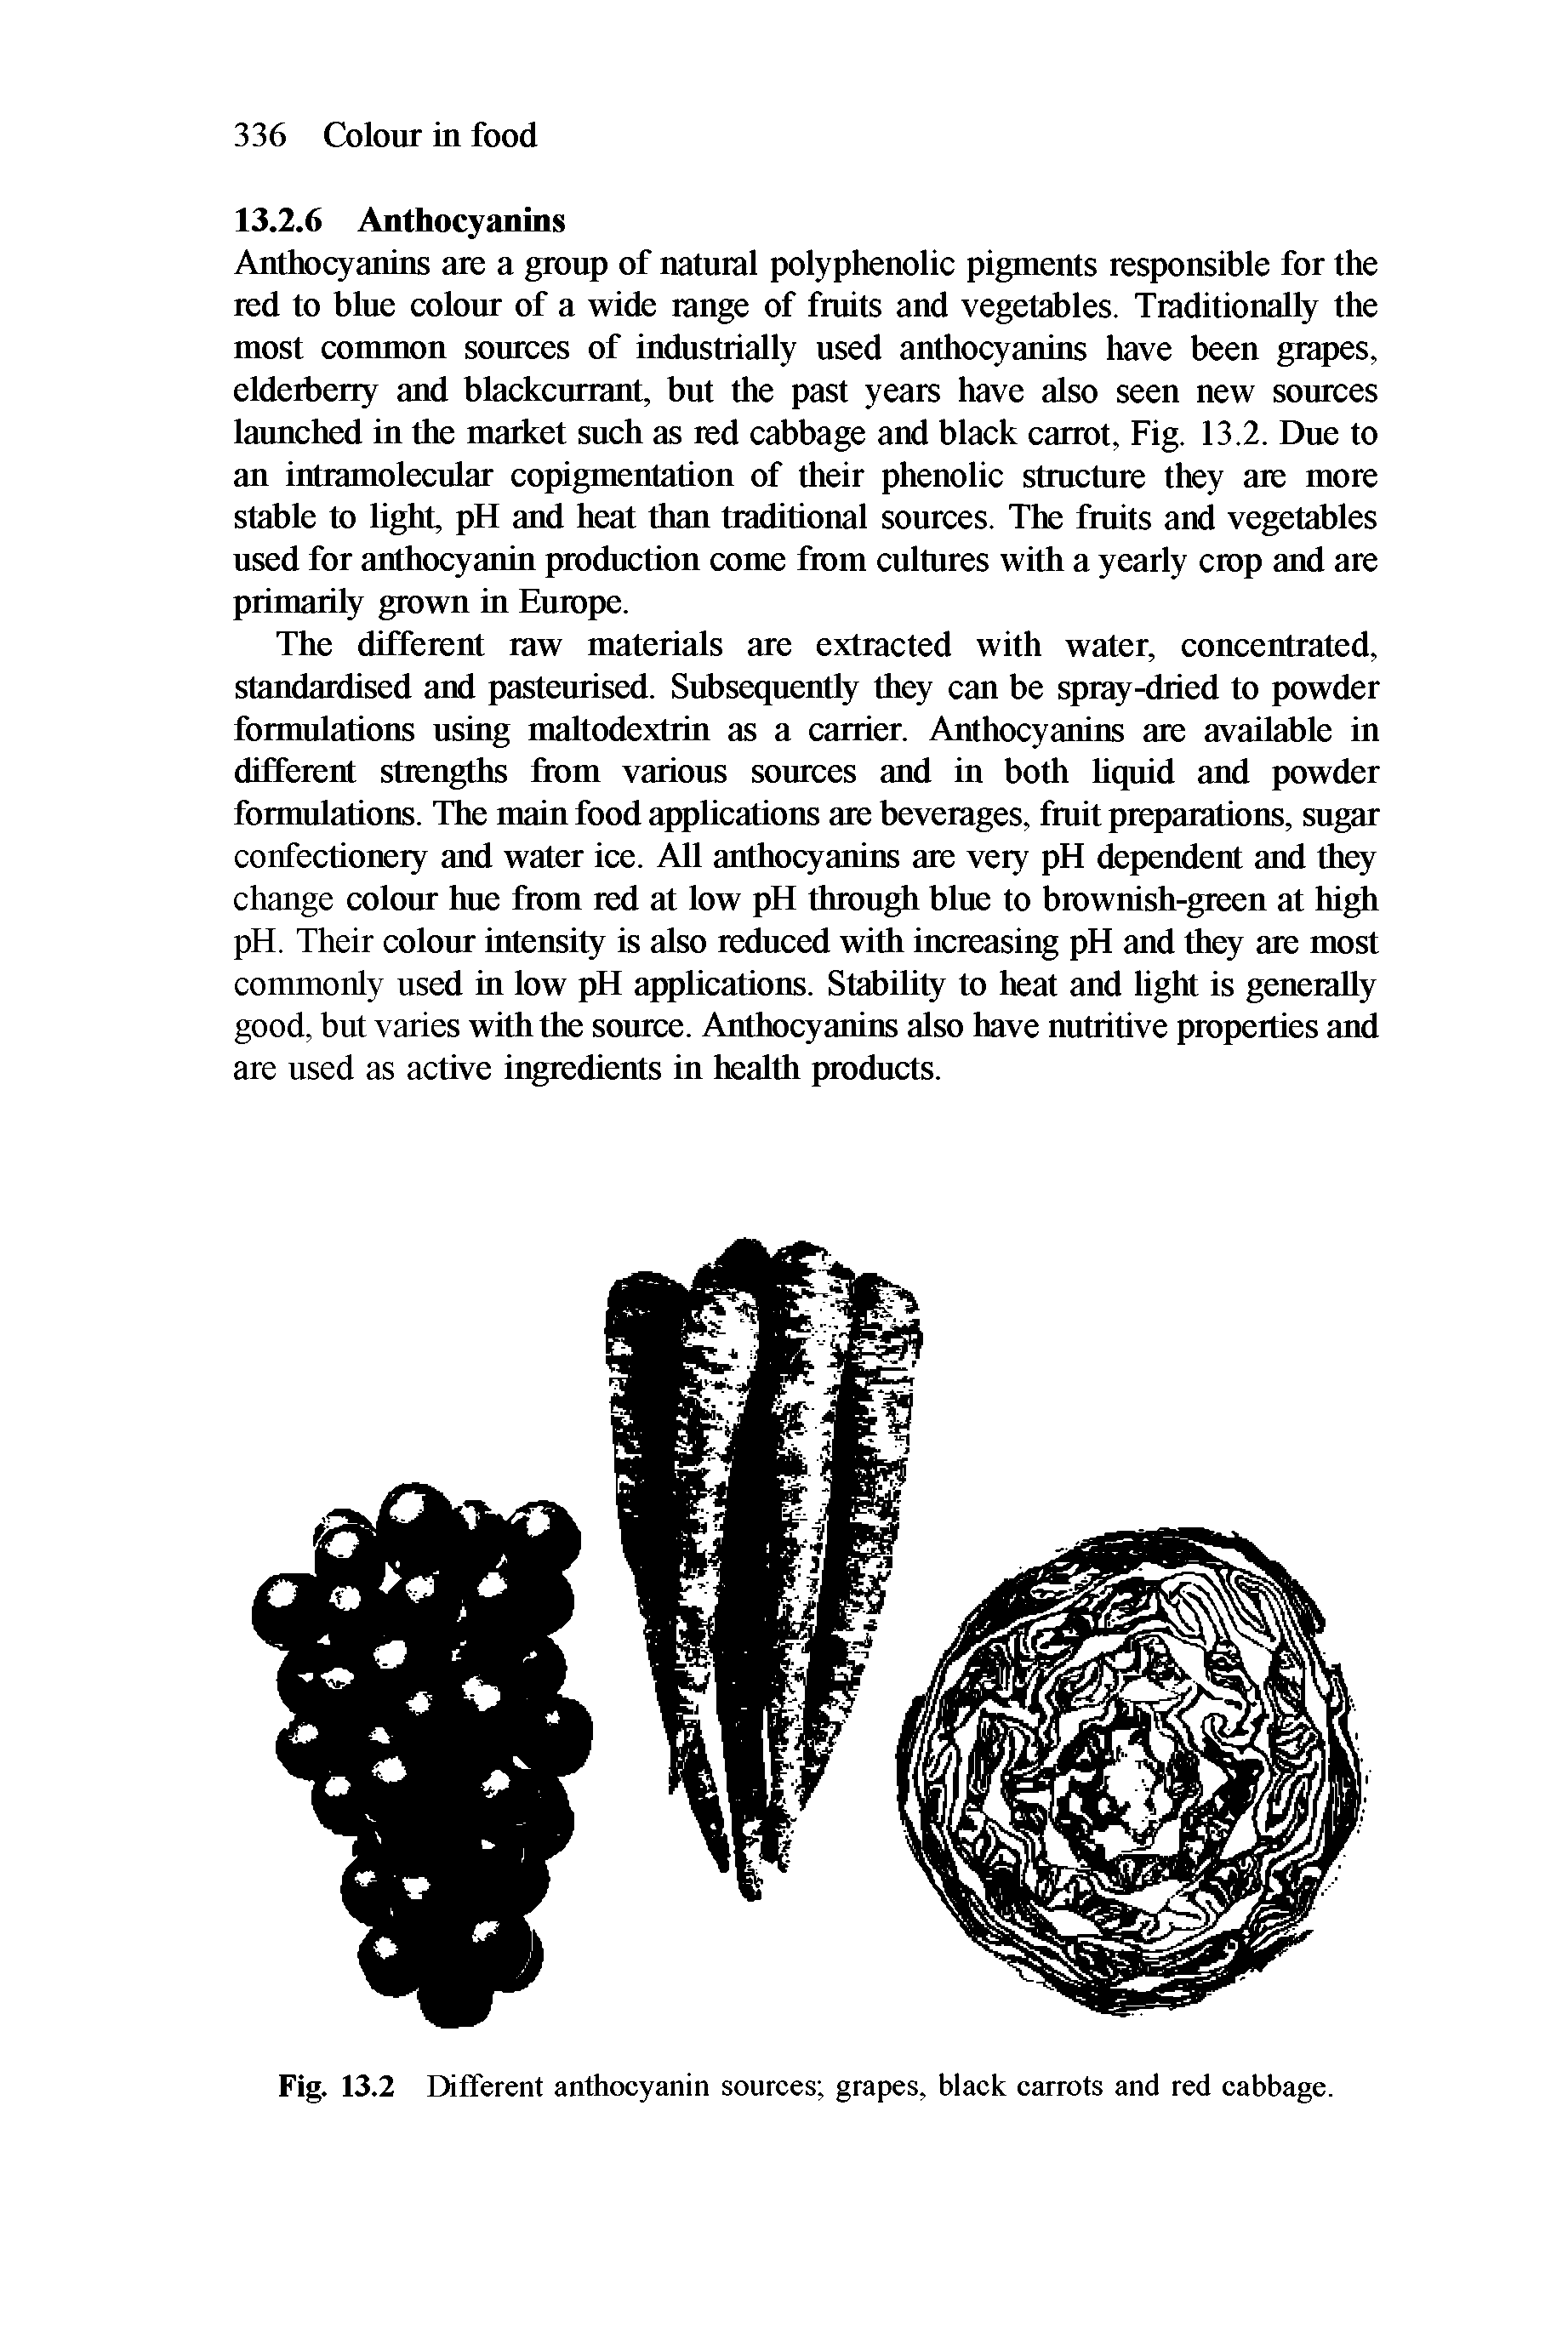 Fig. 13.2 Different anthocyanin sources grapes, black carrots and red cabbage.